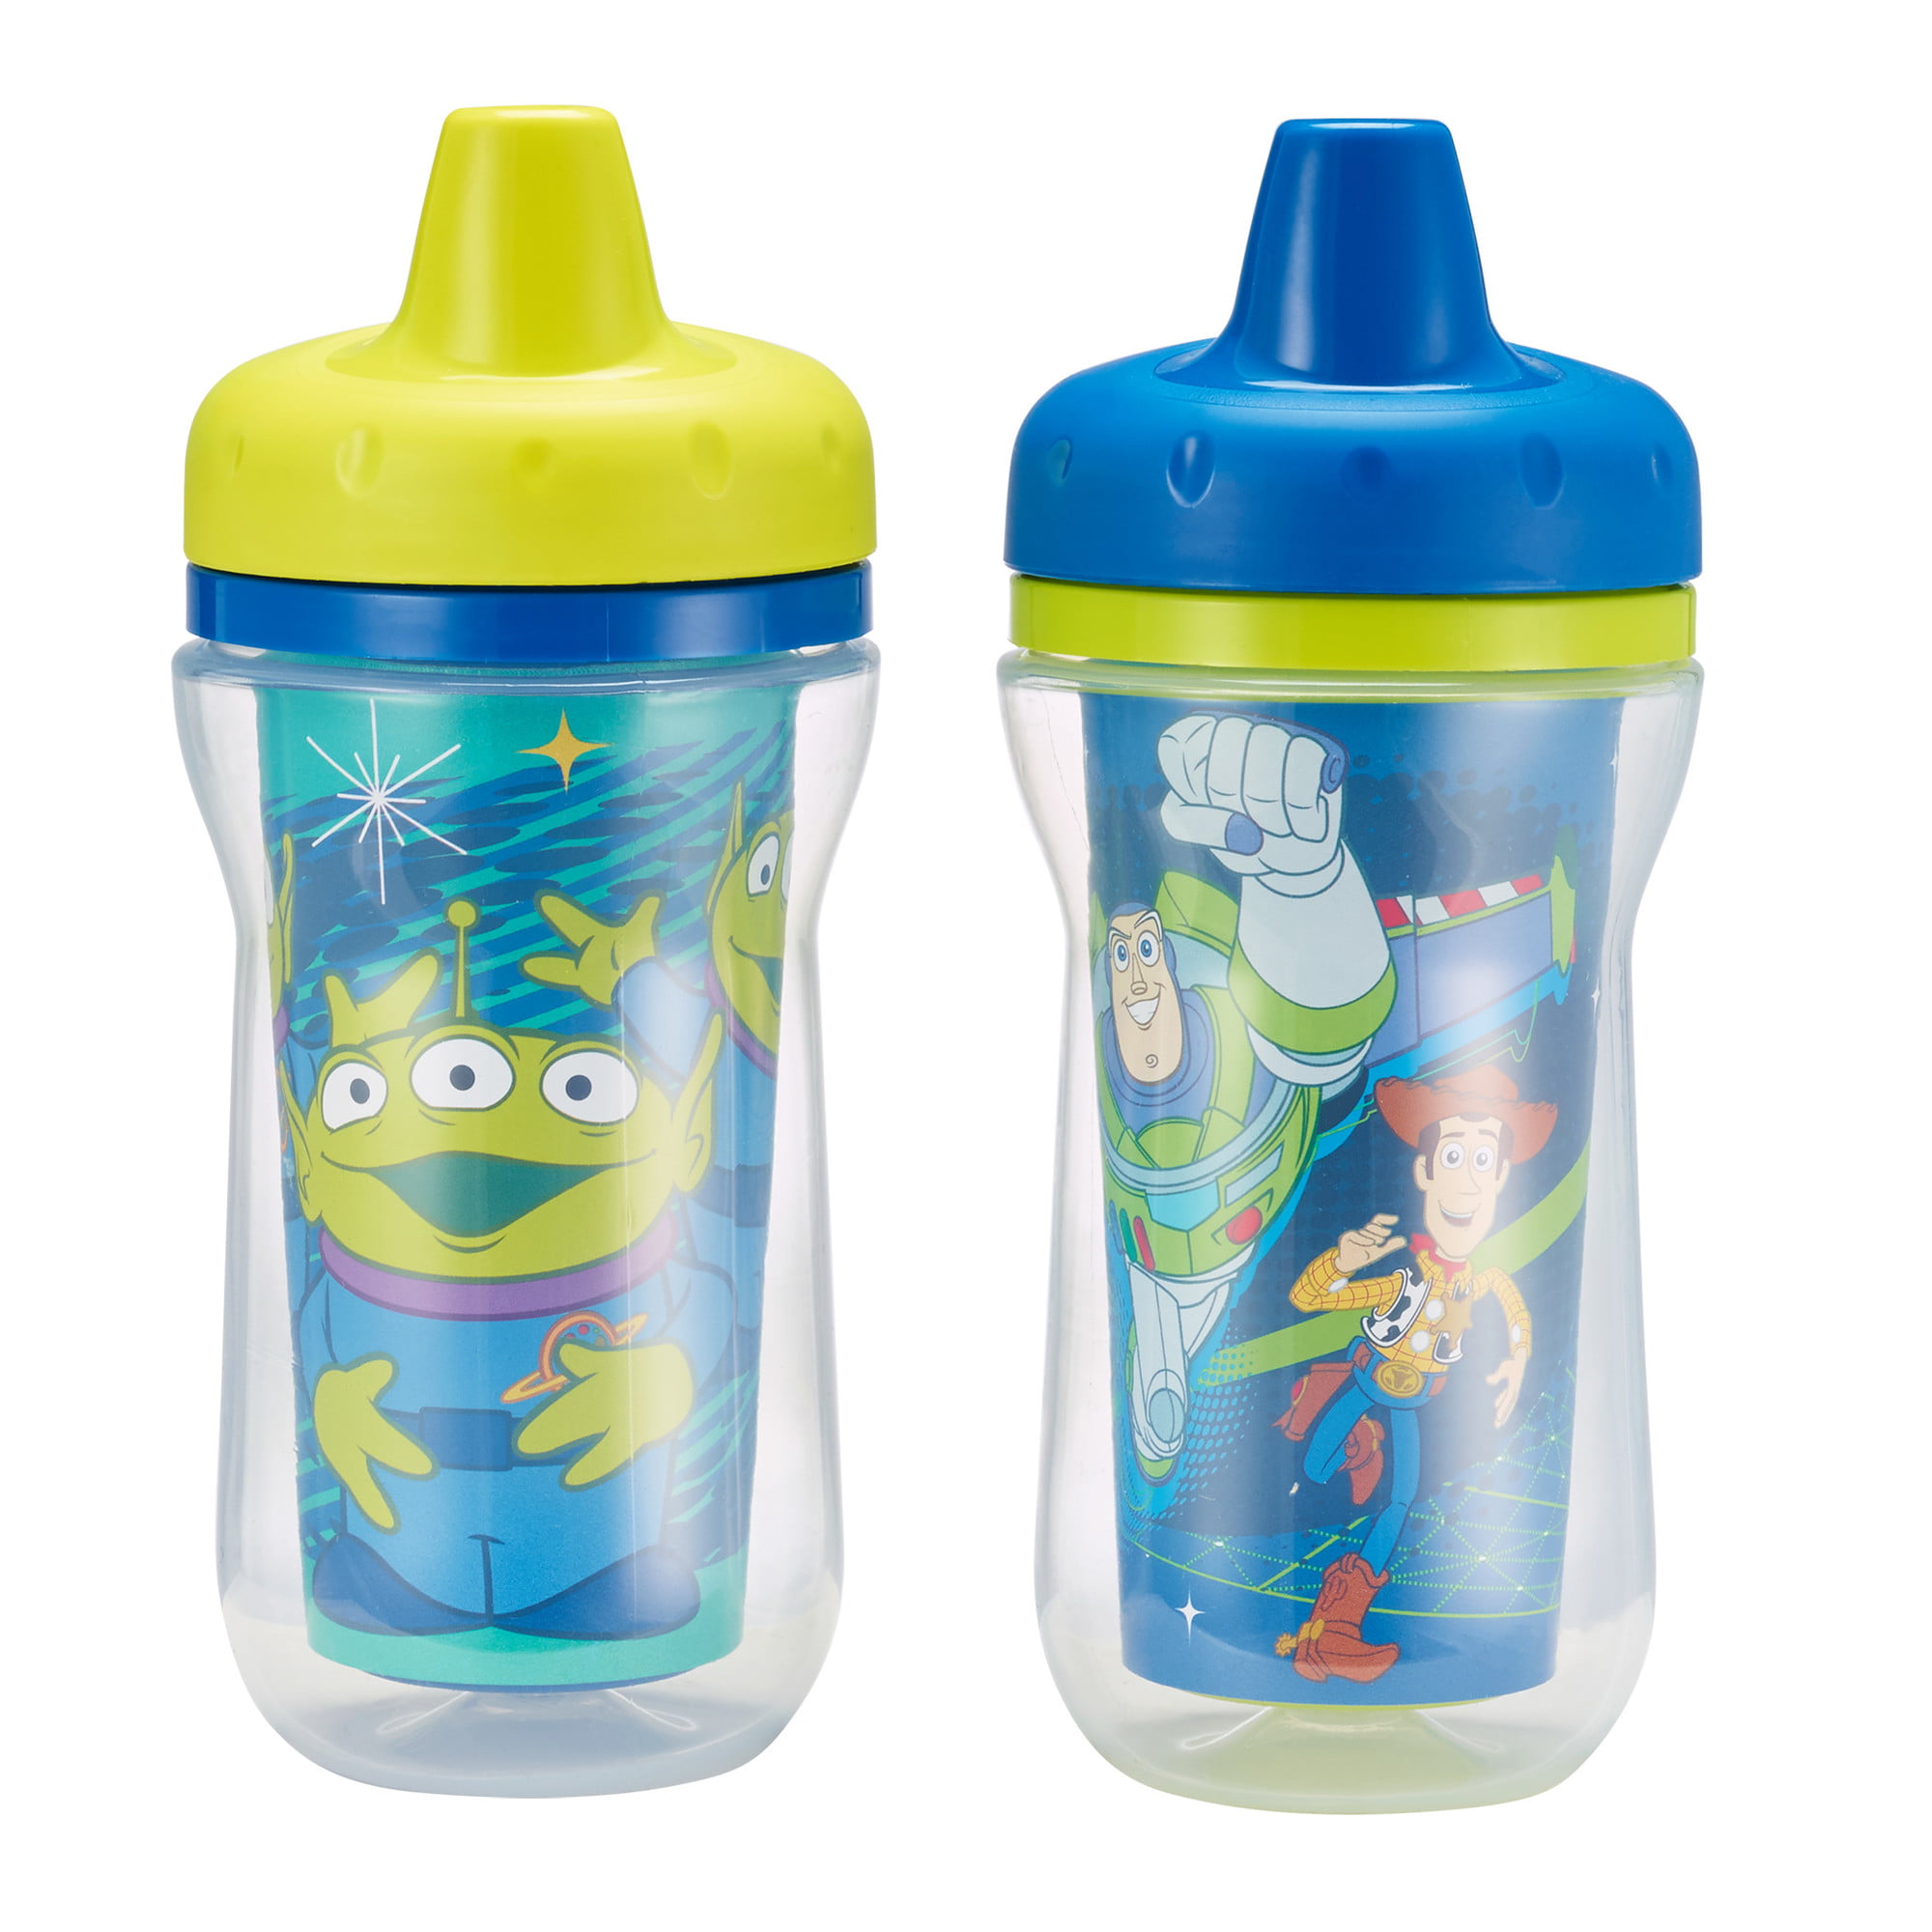 Disney Pixar Toy Story Insulated Hard Spout Sippy Cup 9 Oz